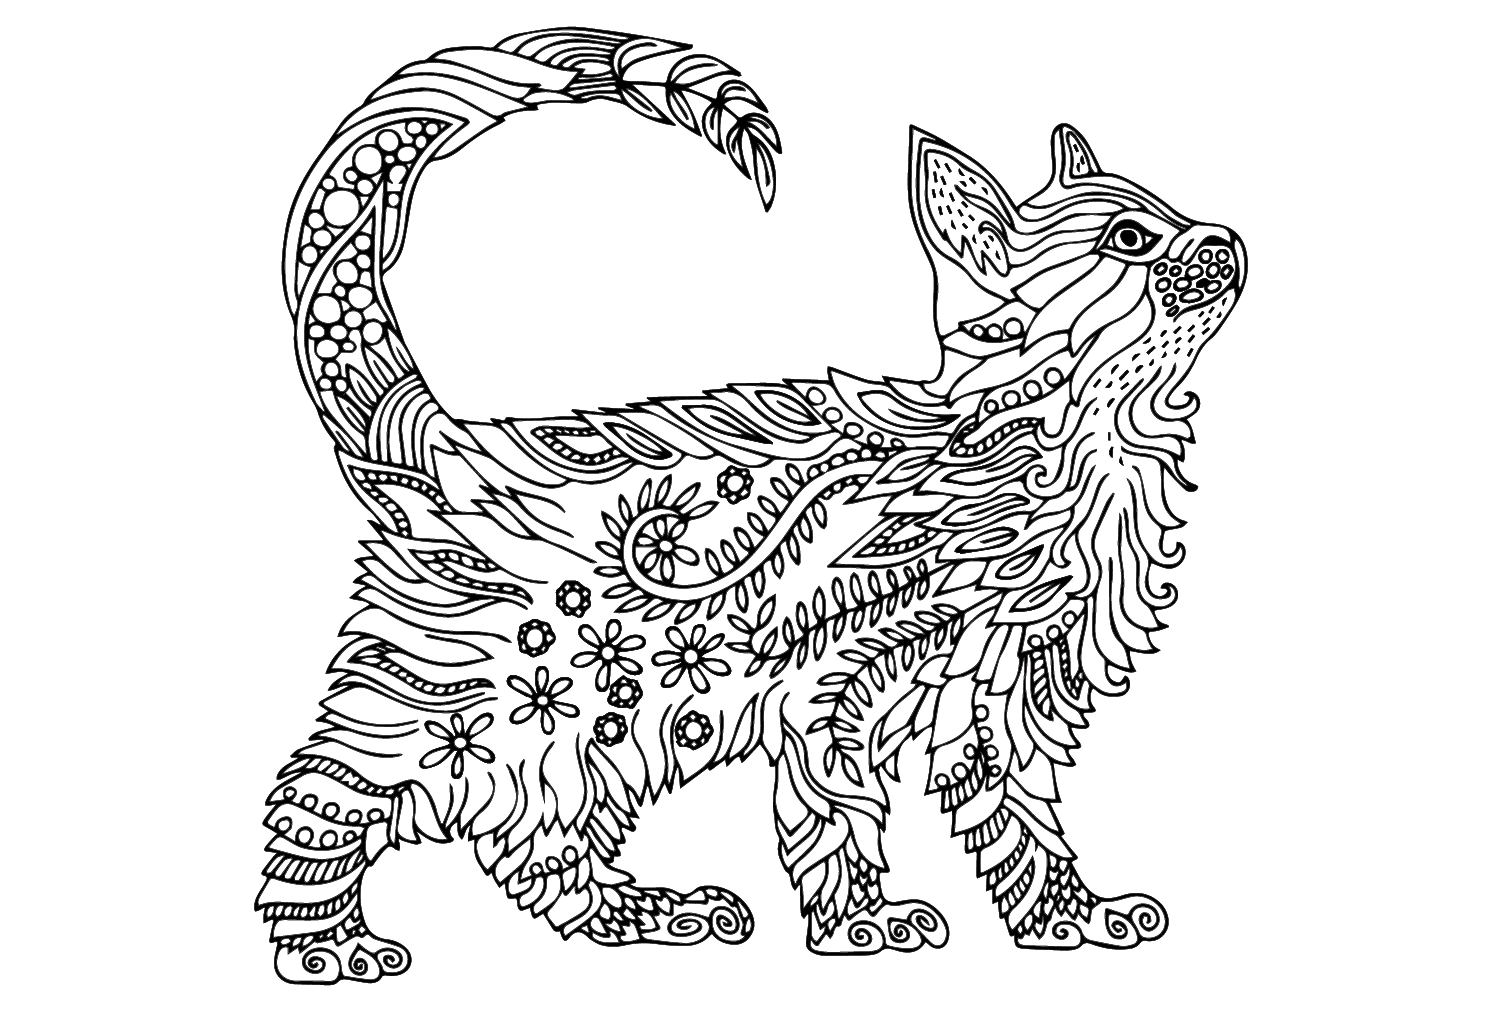 Zentangle Style Cat Coloring Page - Free Printable Coloring Pages